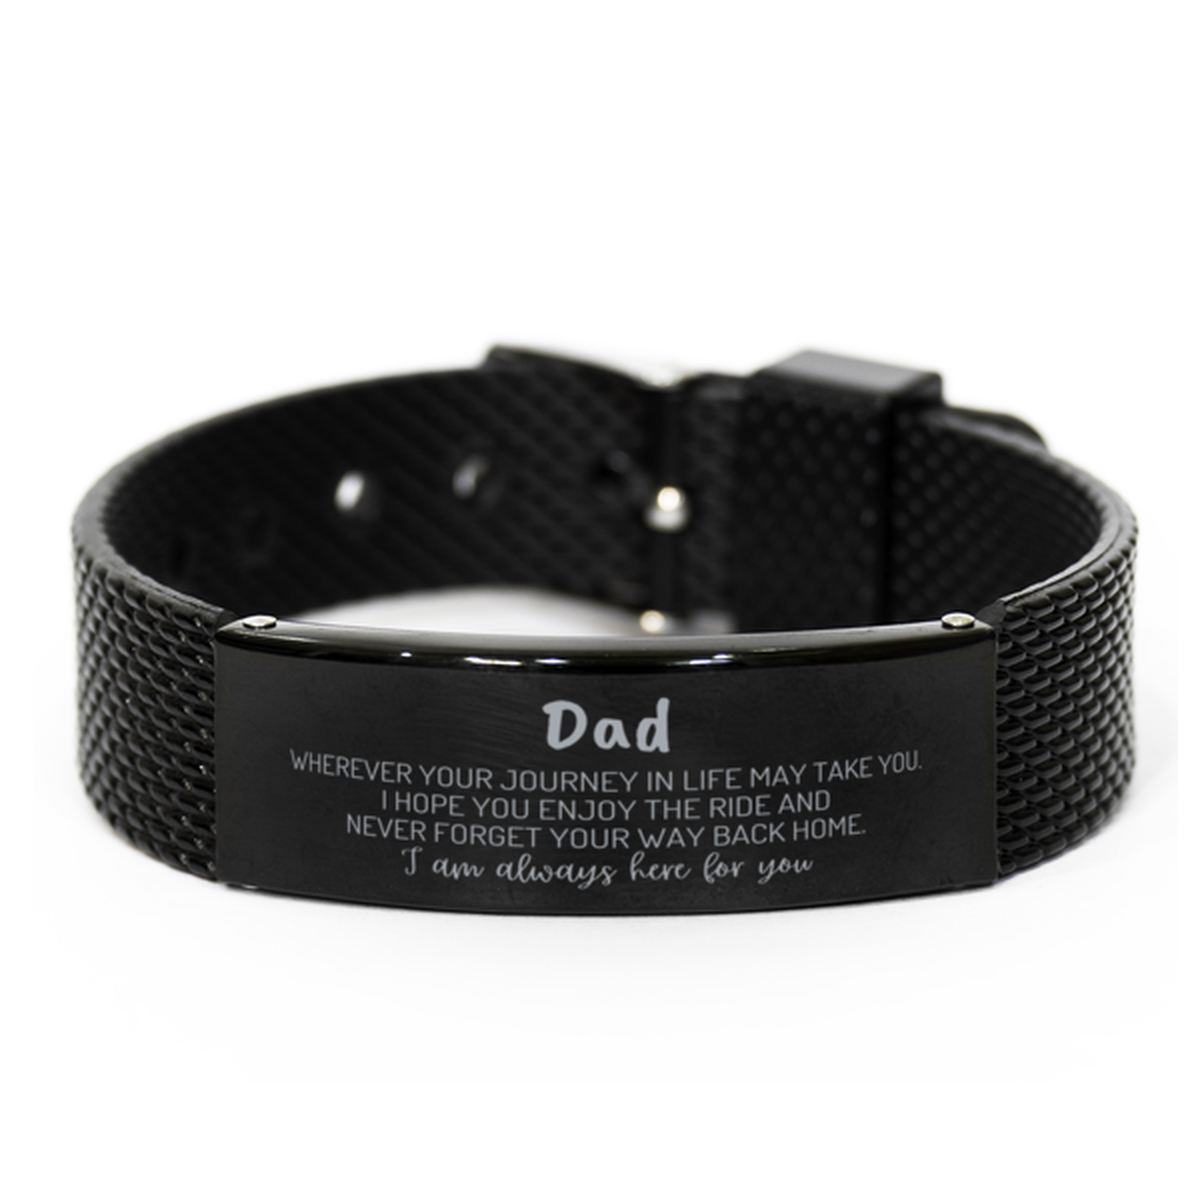 Dad wherever your journey in life may take you, I am always here for you Dad Black Shark Mesh Bracelet, Awesome Christmas Gifts For Dad, Dad Birthday Gifts for Men Women Family Loved One